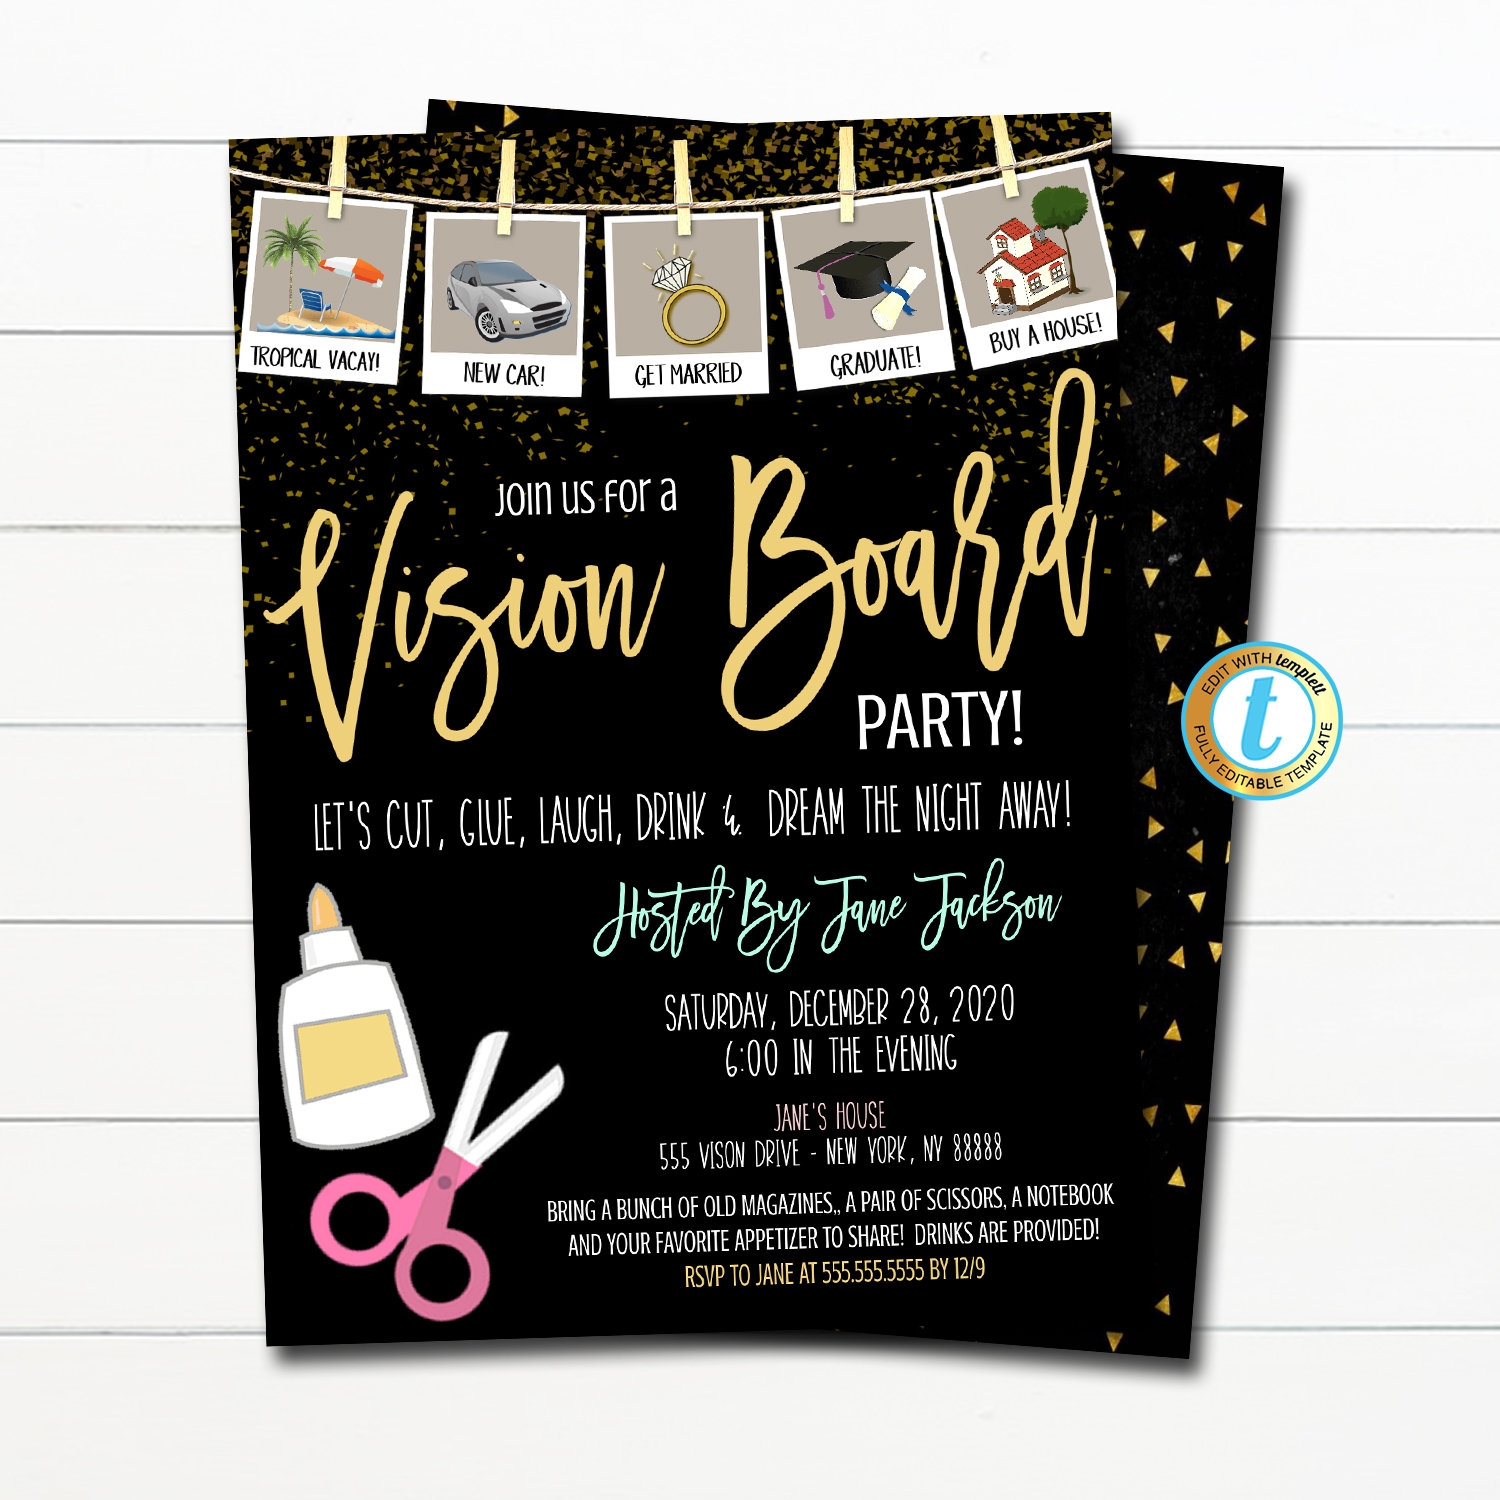 How To PLAN a VISION BOARD PARTY, Hosting a 2020 VISION BOARD PARTY